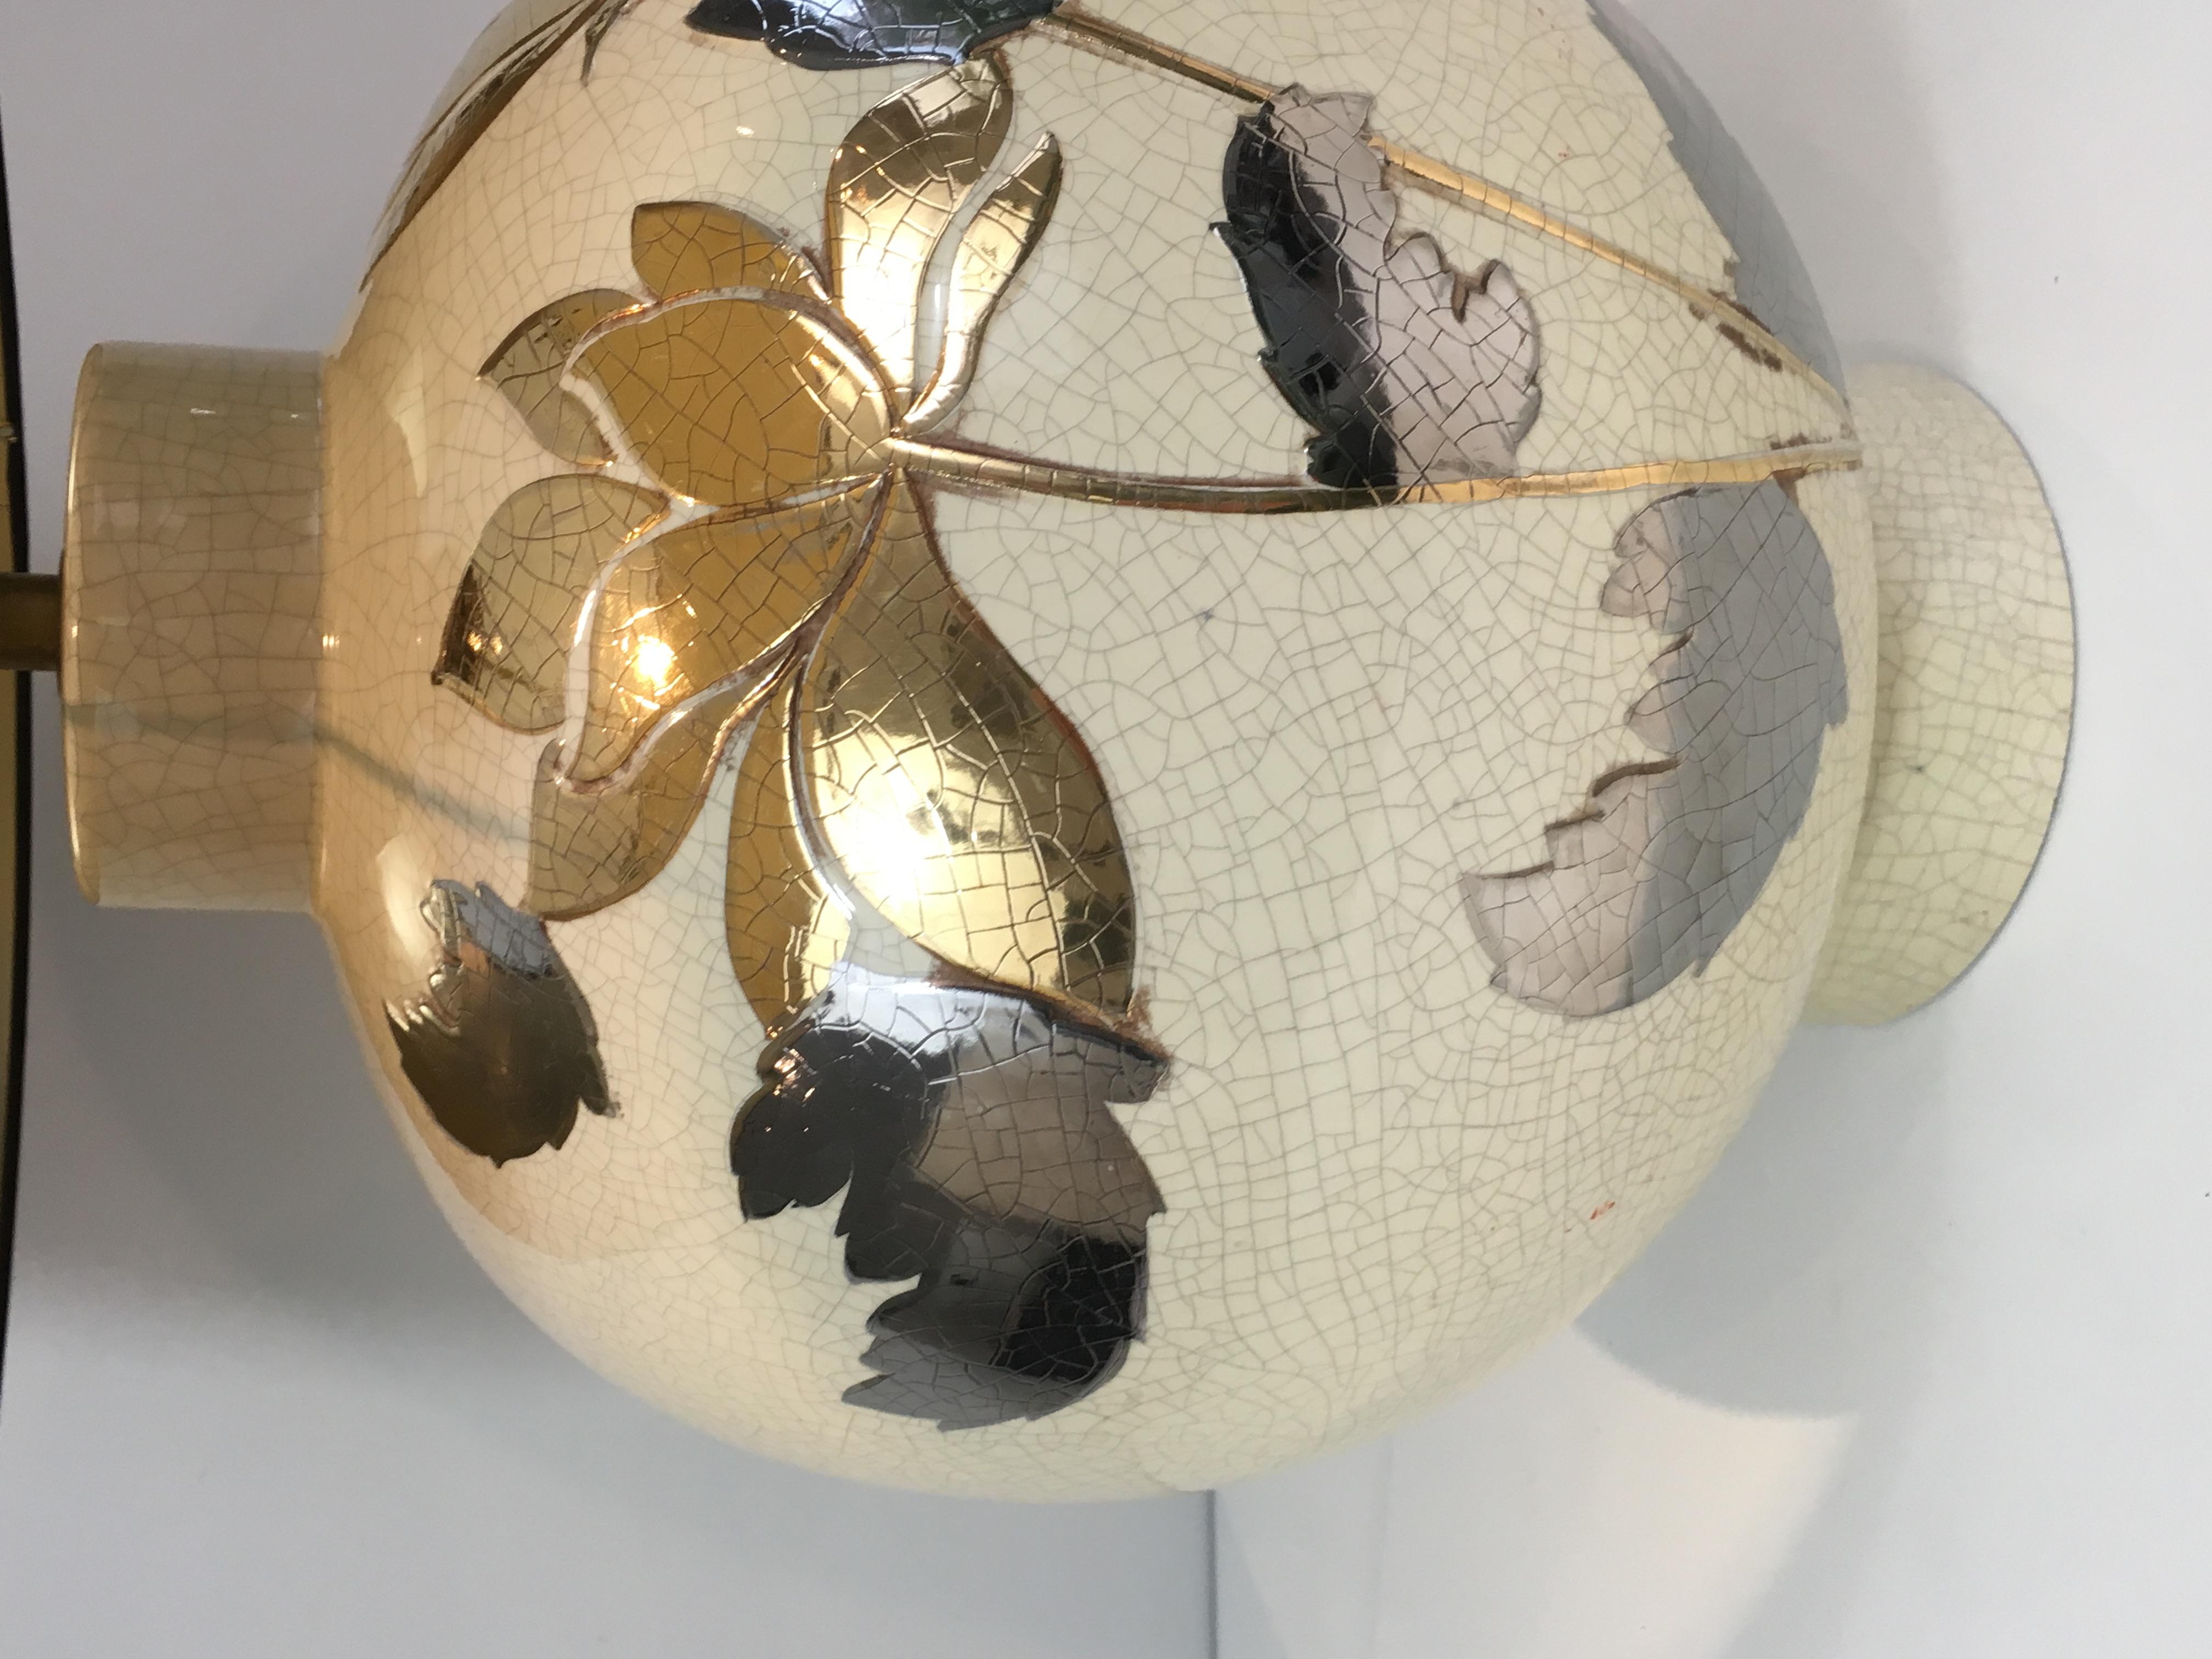 By L Drummer, Cracked Ceramic Lamp with Silver and Gold Flower Decoration on the 1